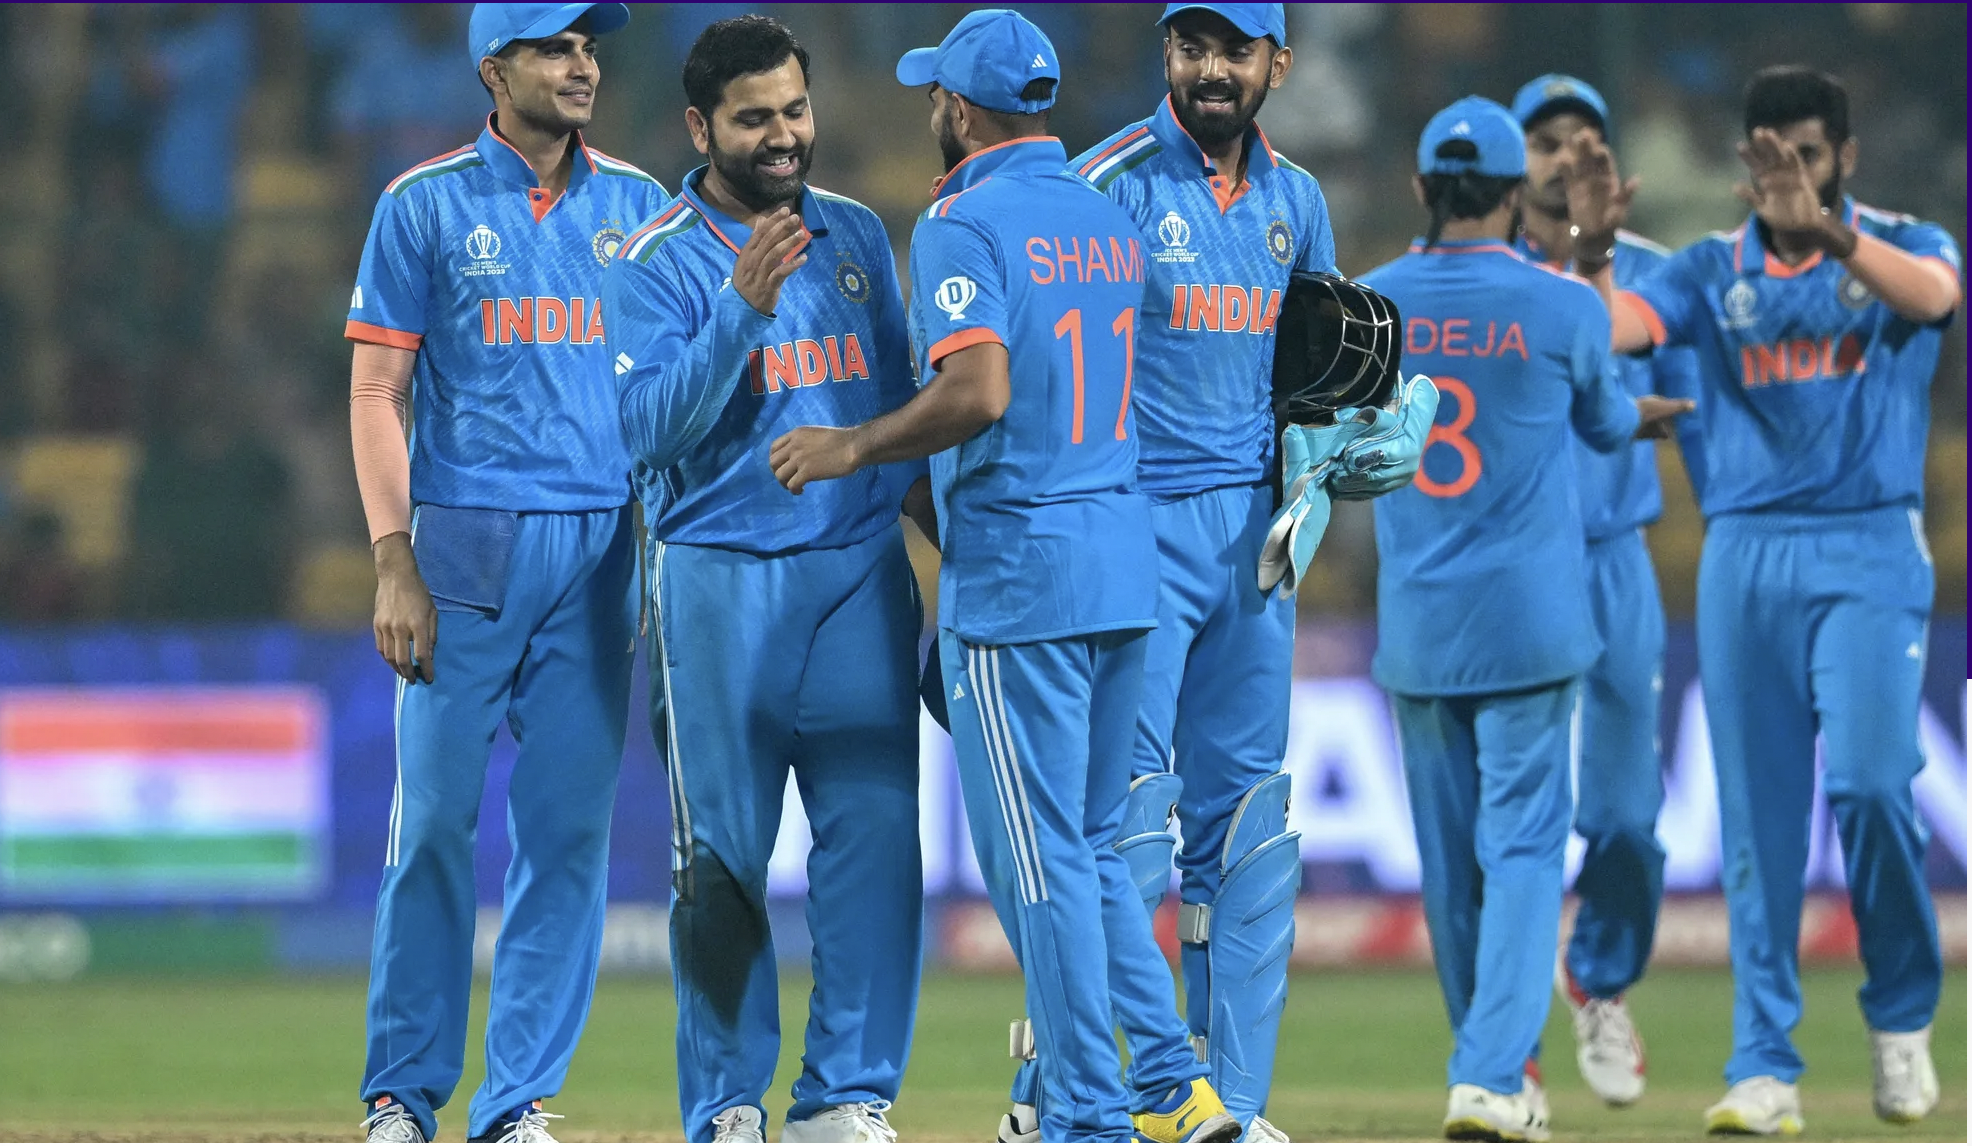 India won its ninth consecutive tournament in CWC23